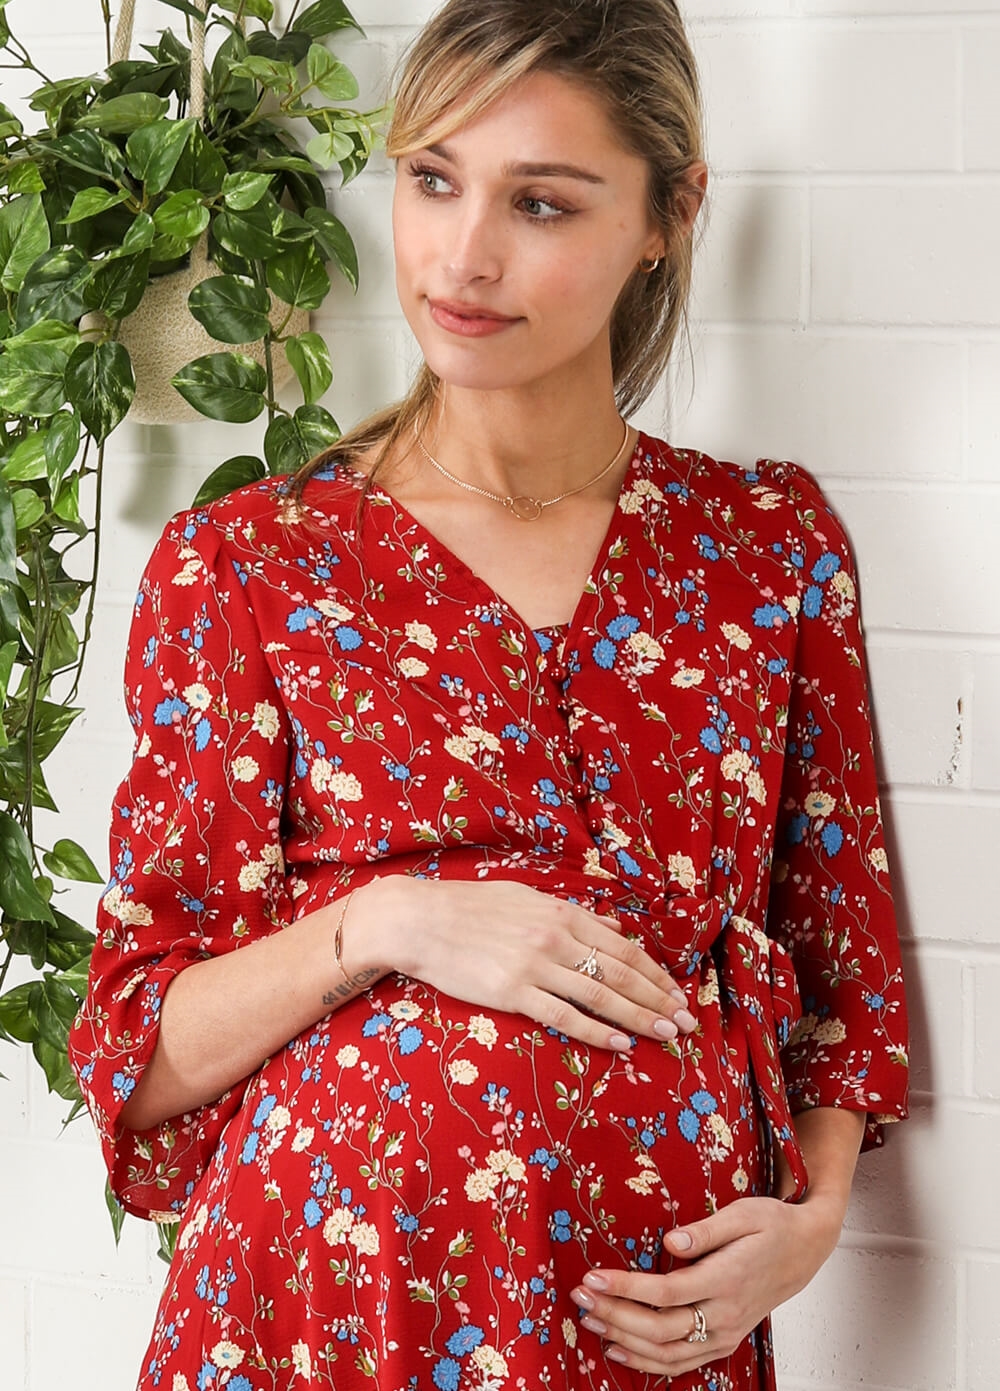 Lait & Co - Provence Maternity Dress in Red Floral | Queen Bee